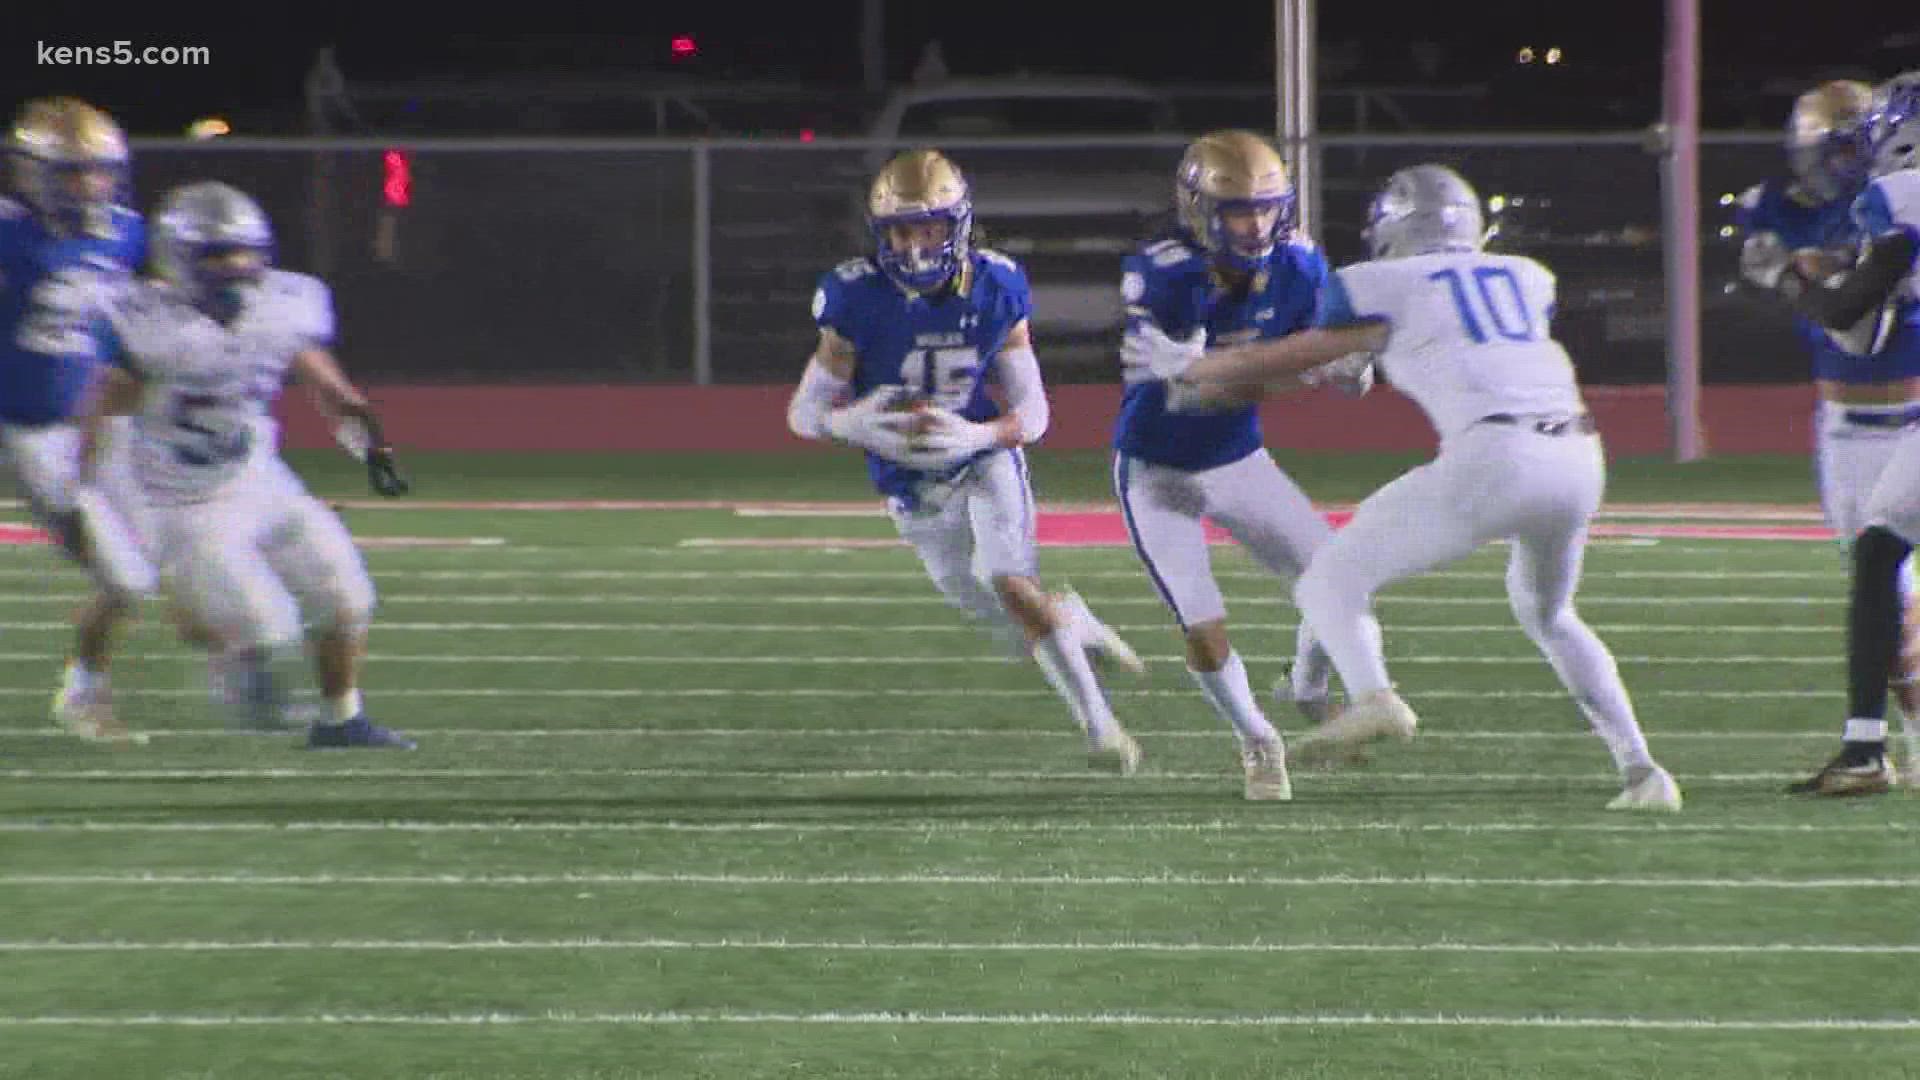 Alamo Heights, Steele brought an exciting night in the first round of high school playoff action.